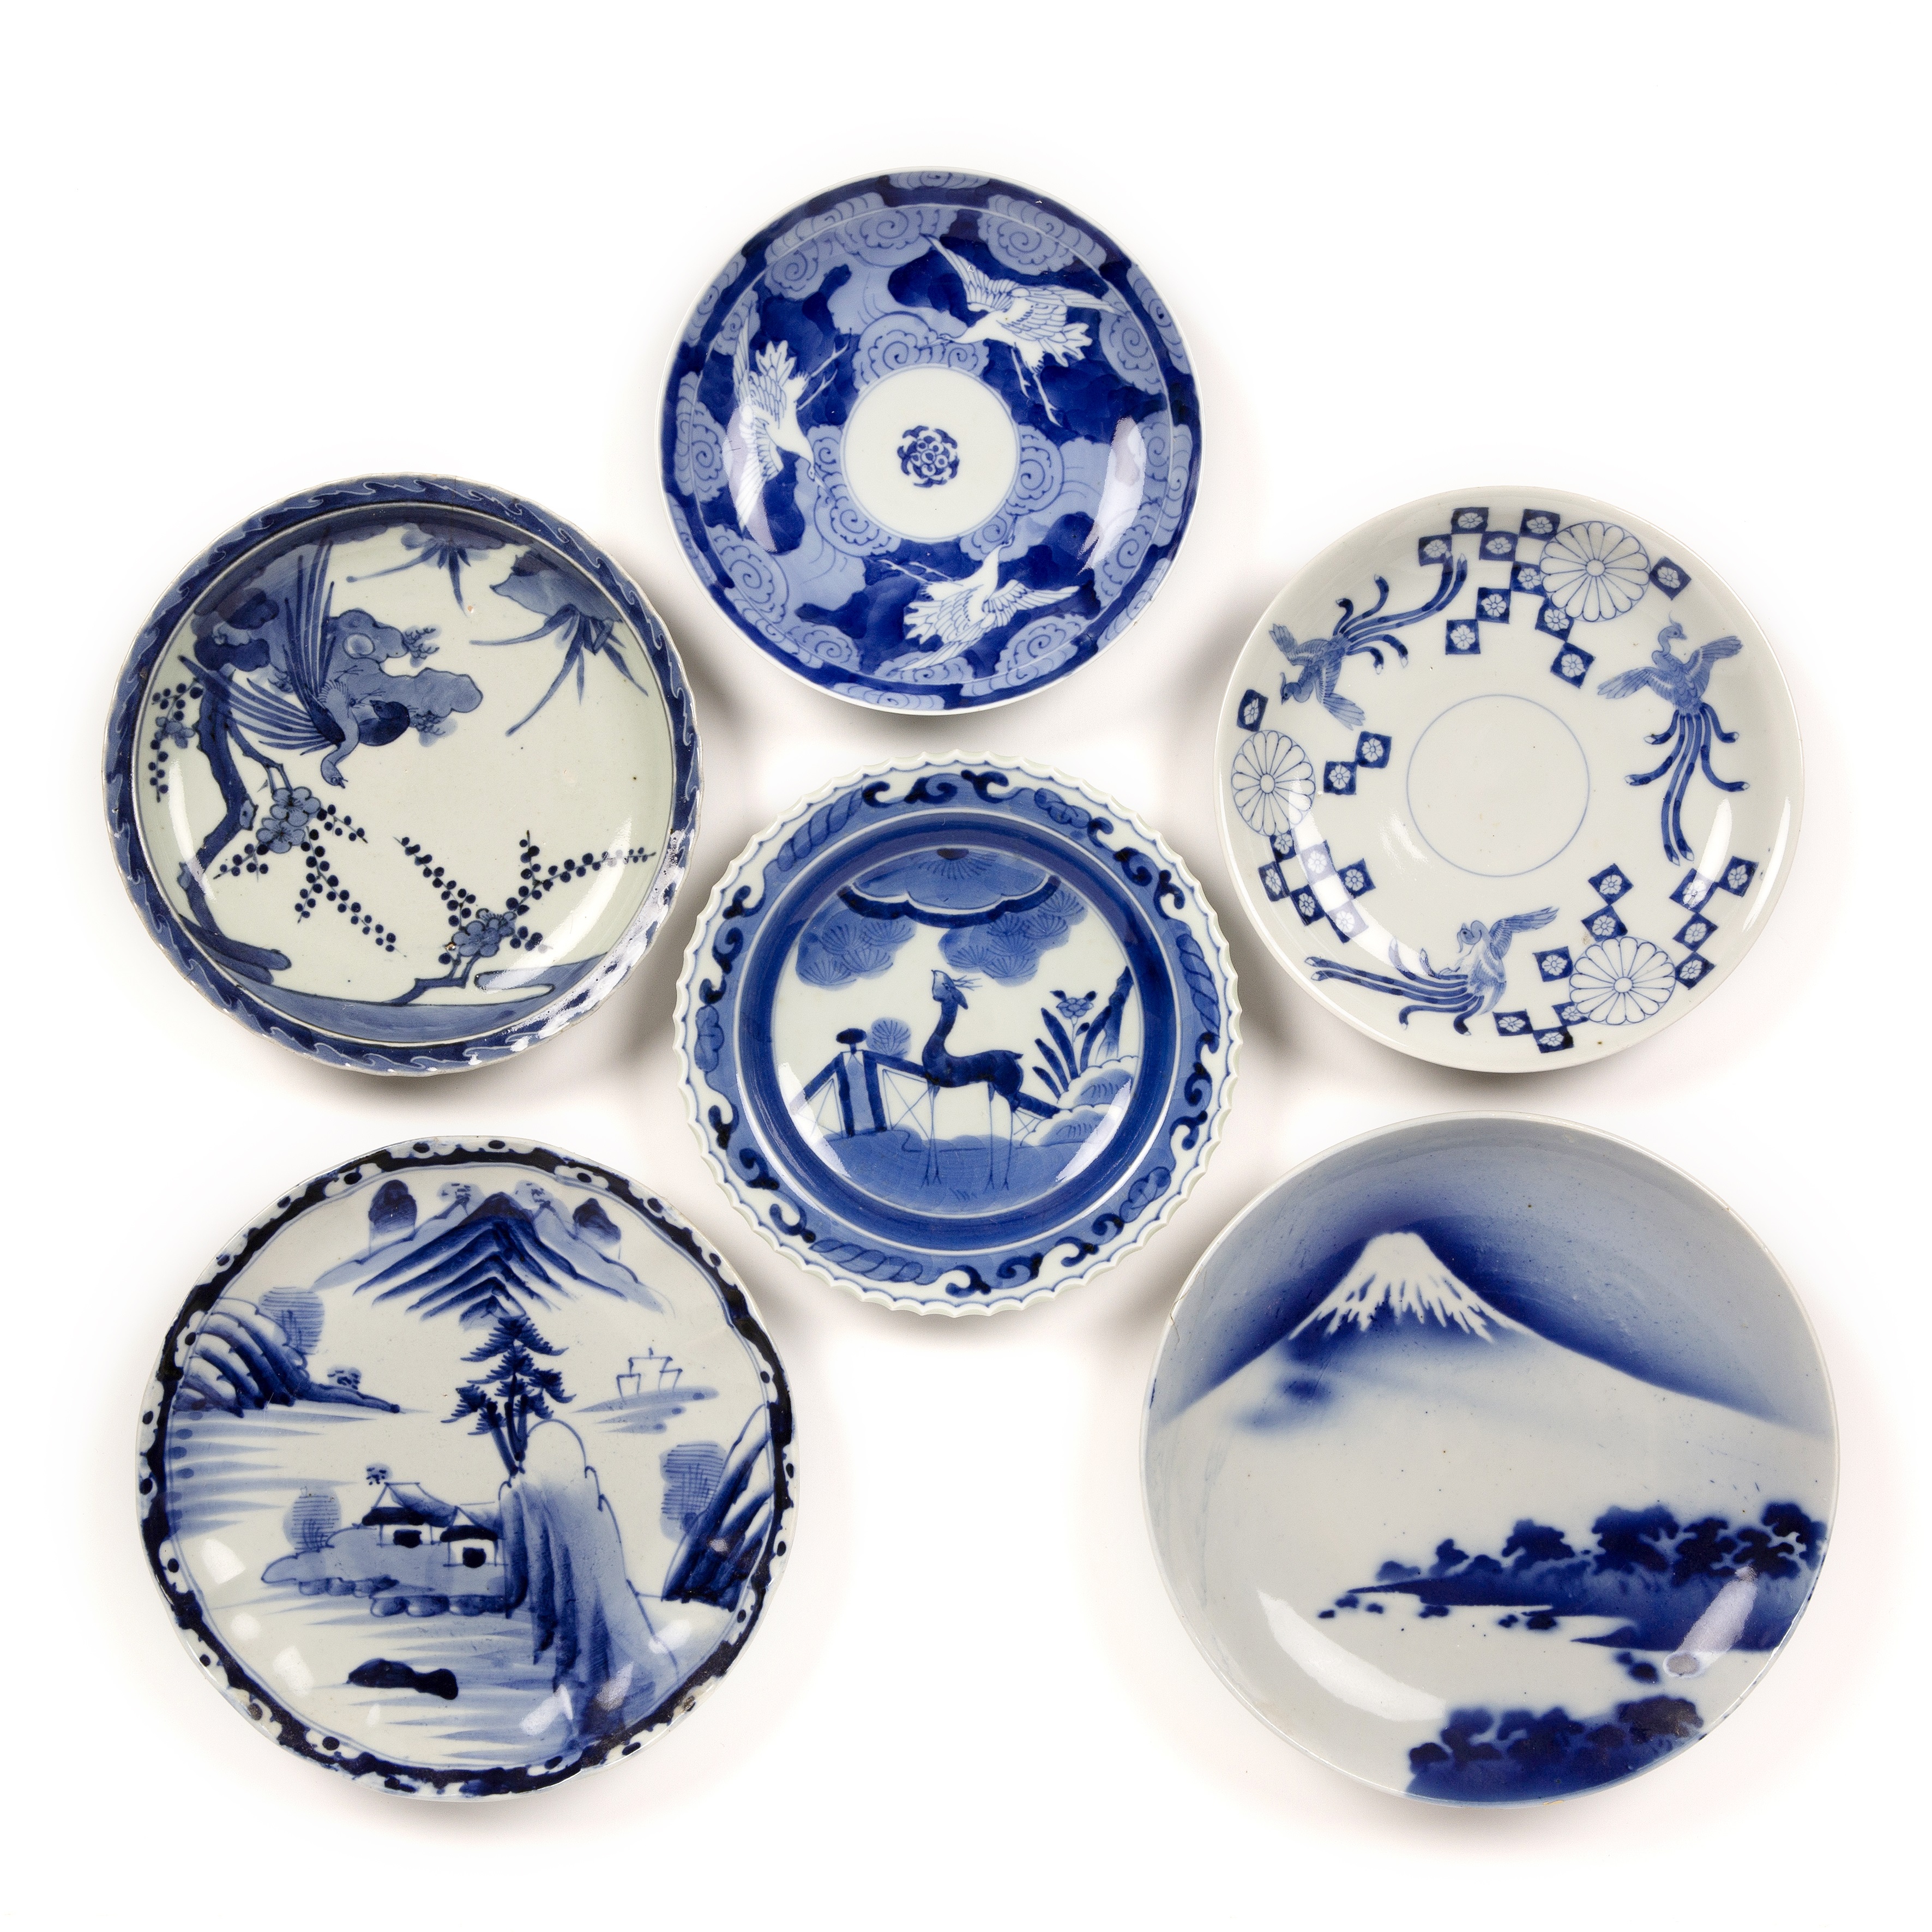 Group of Arita blue and white dishes Japanese, 19th Century variously decorated with phoenix, deer